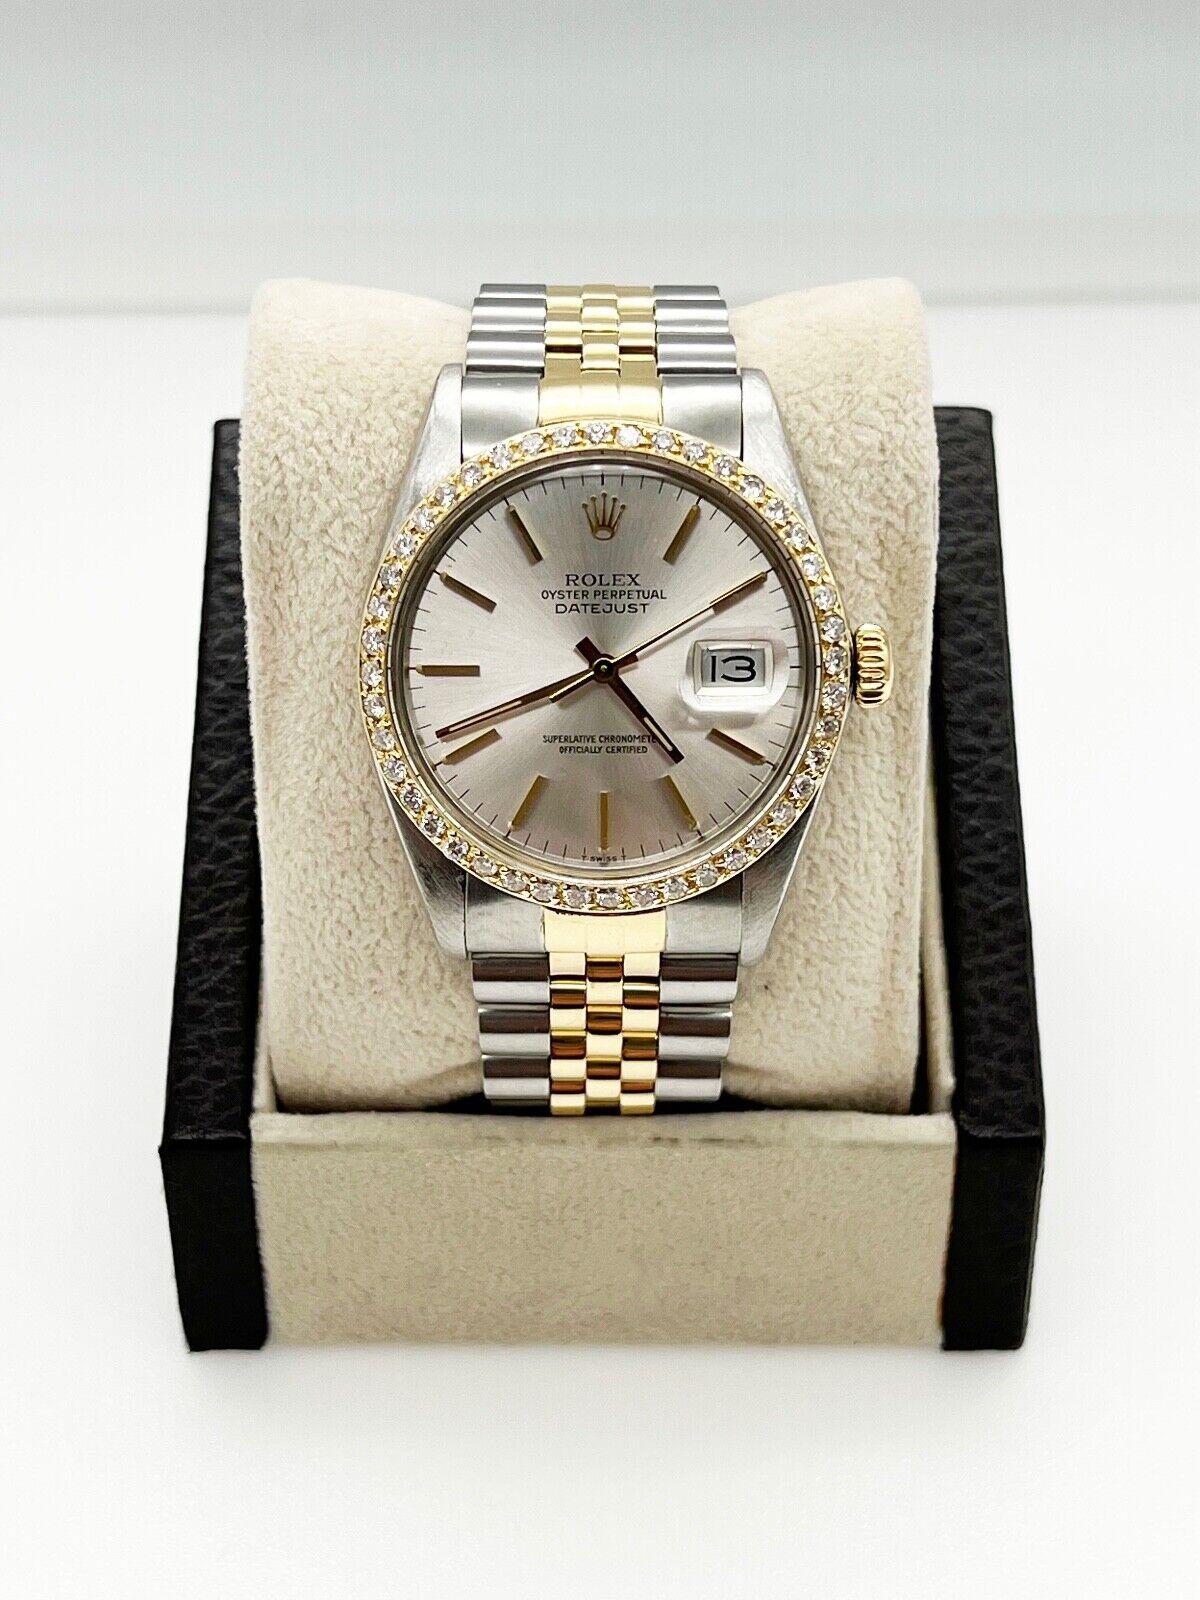 Rolex Datejust 16013 Silver Dial 18K Yellow Gold Stainless Steel For Sale 3